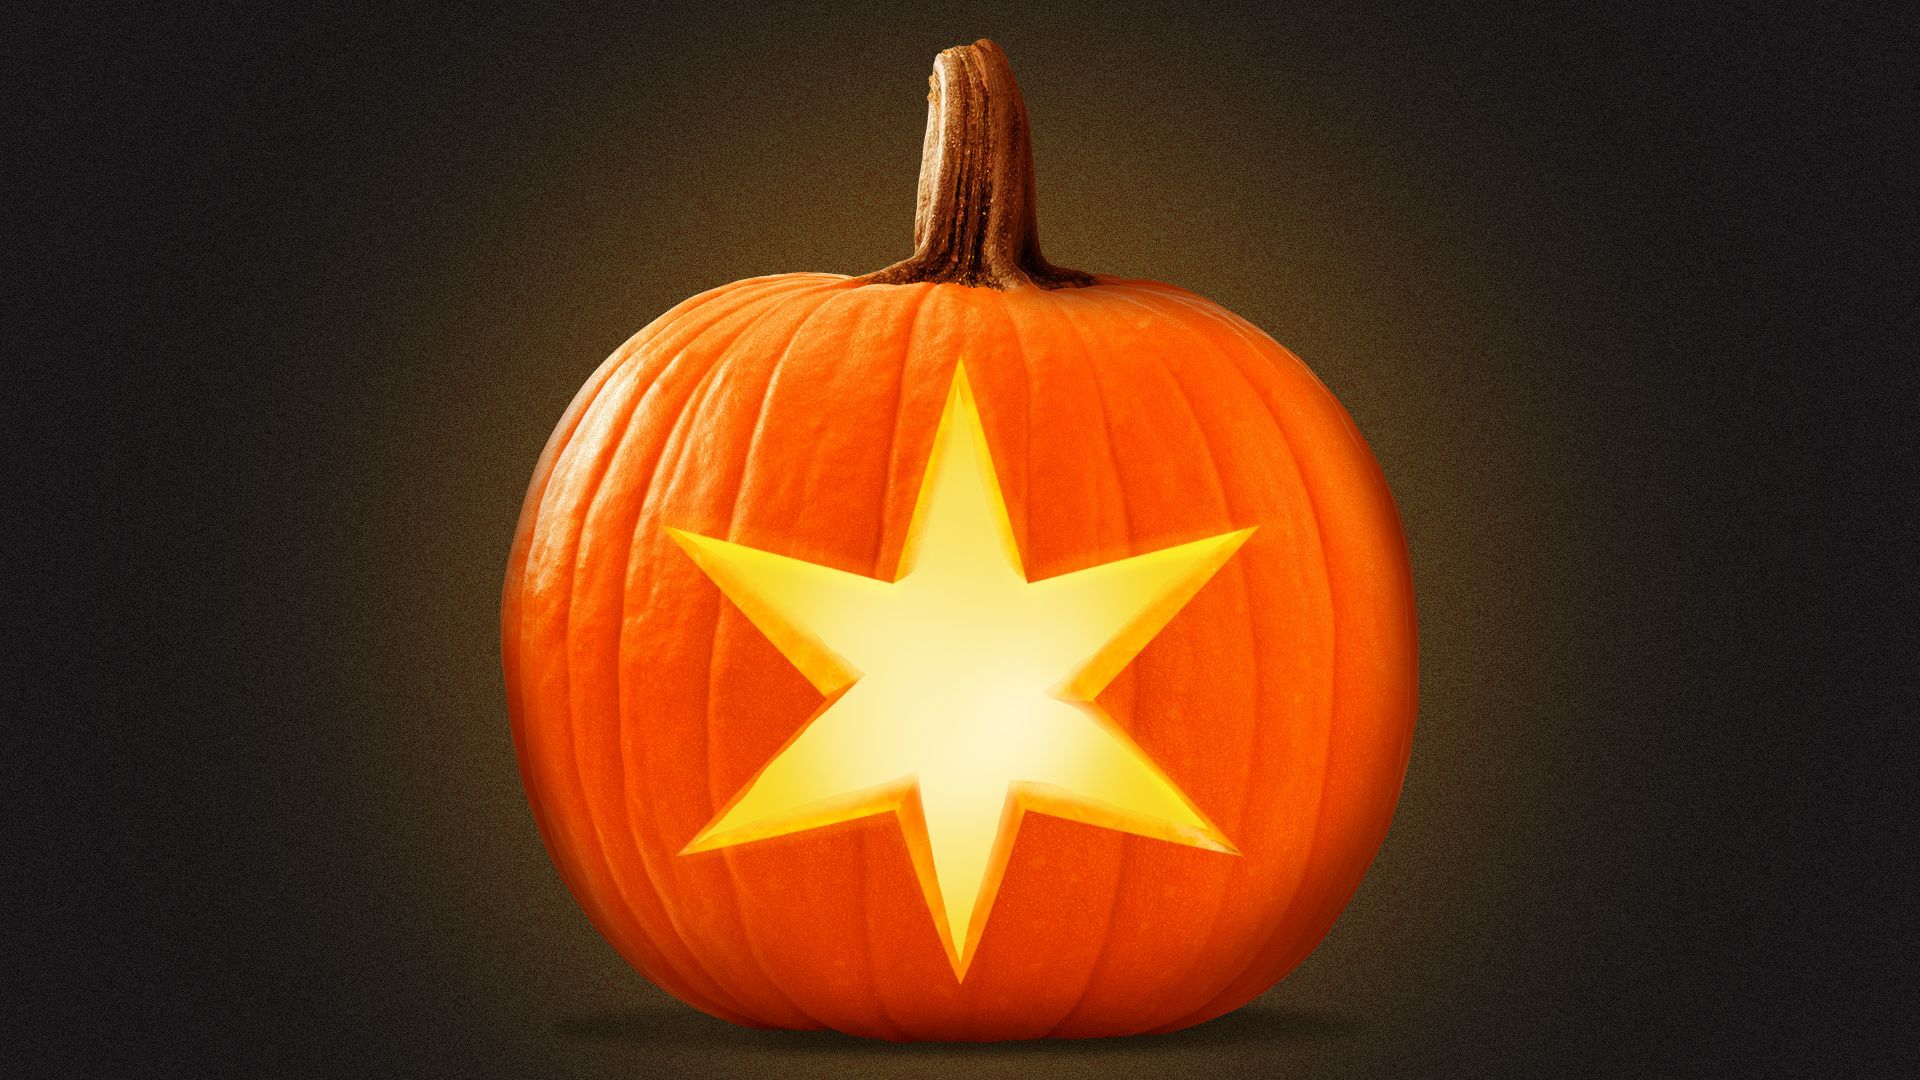 Illustration of the Chicago star carved into a pumpkin.